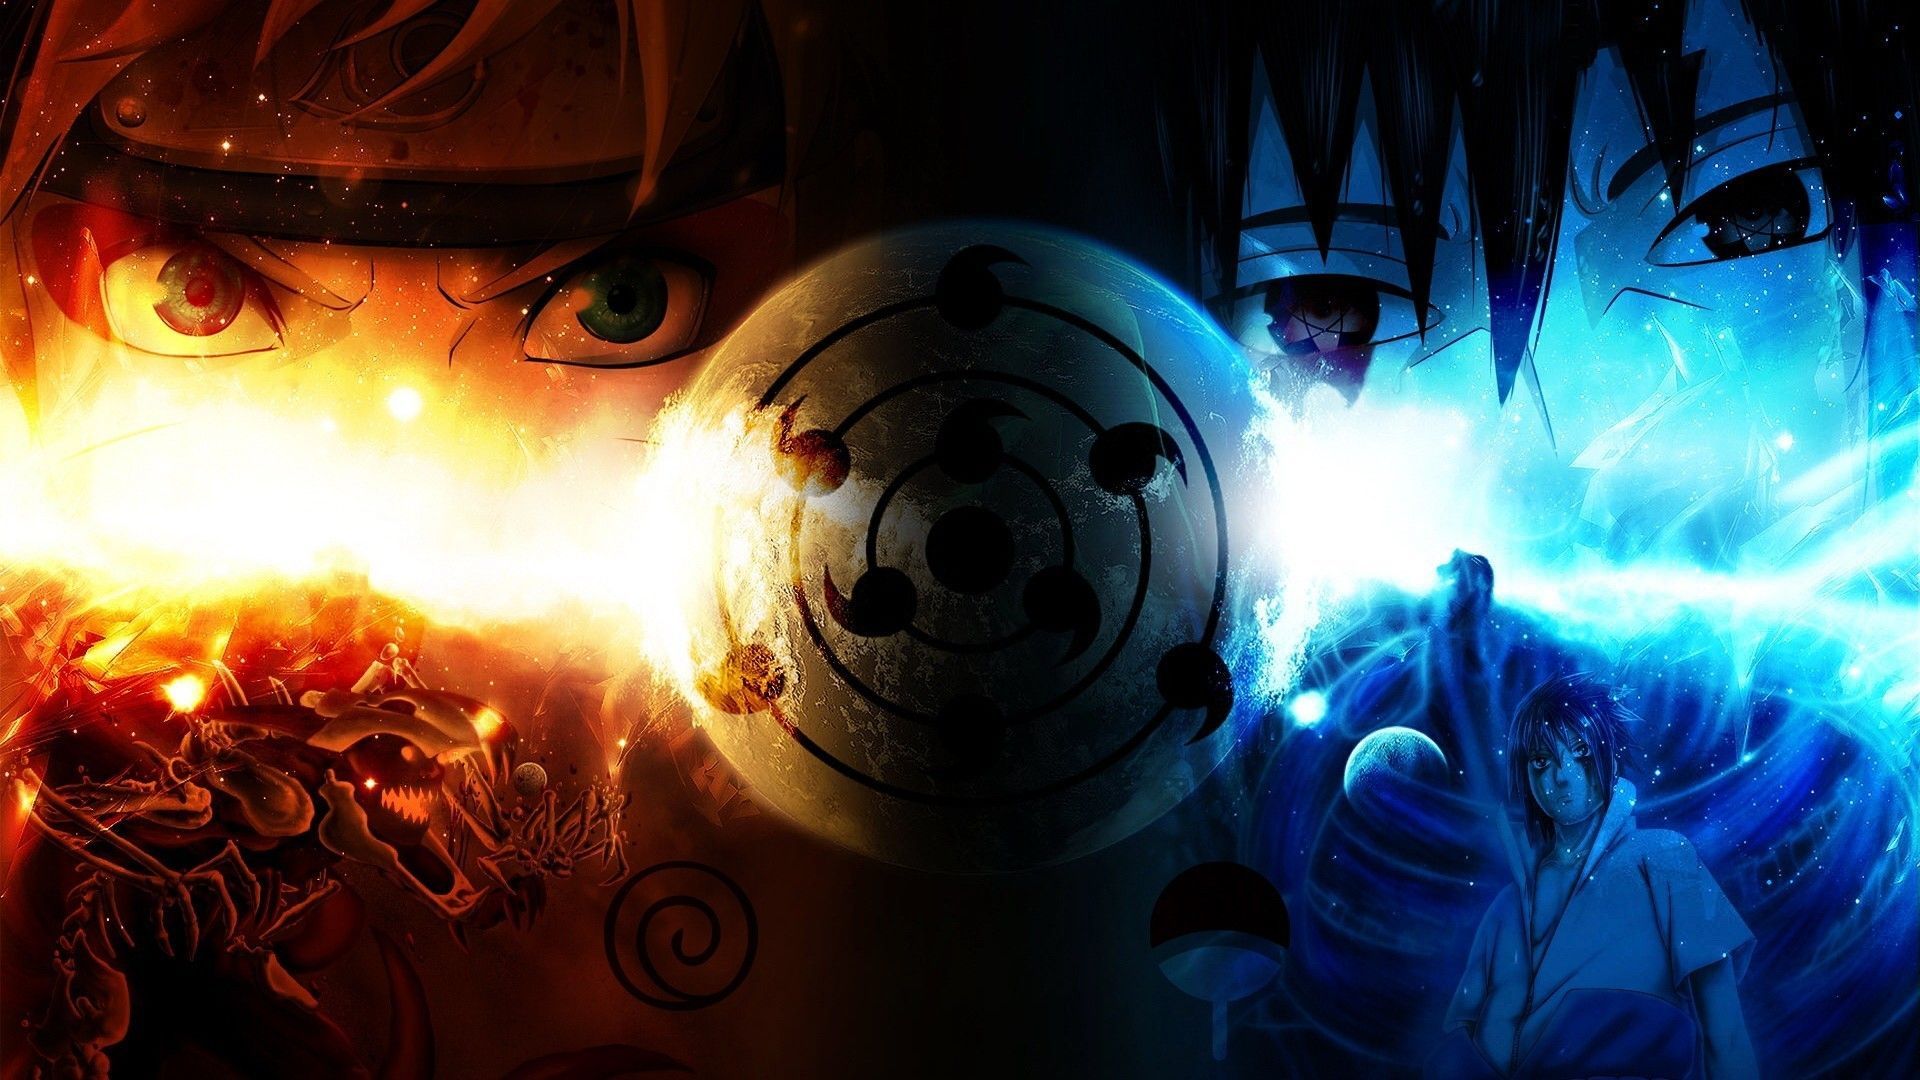 Coolest Naruto Wallpaper Free Coolest Naruto Background